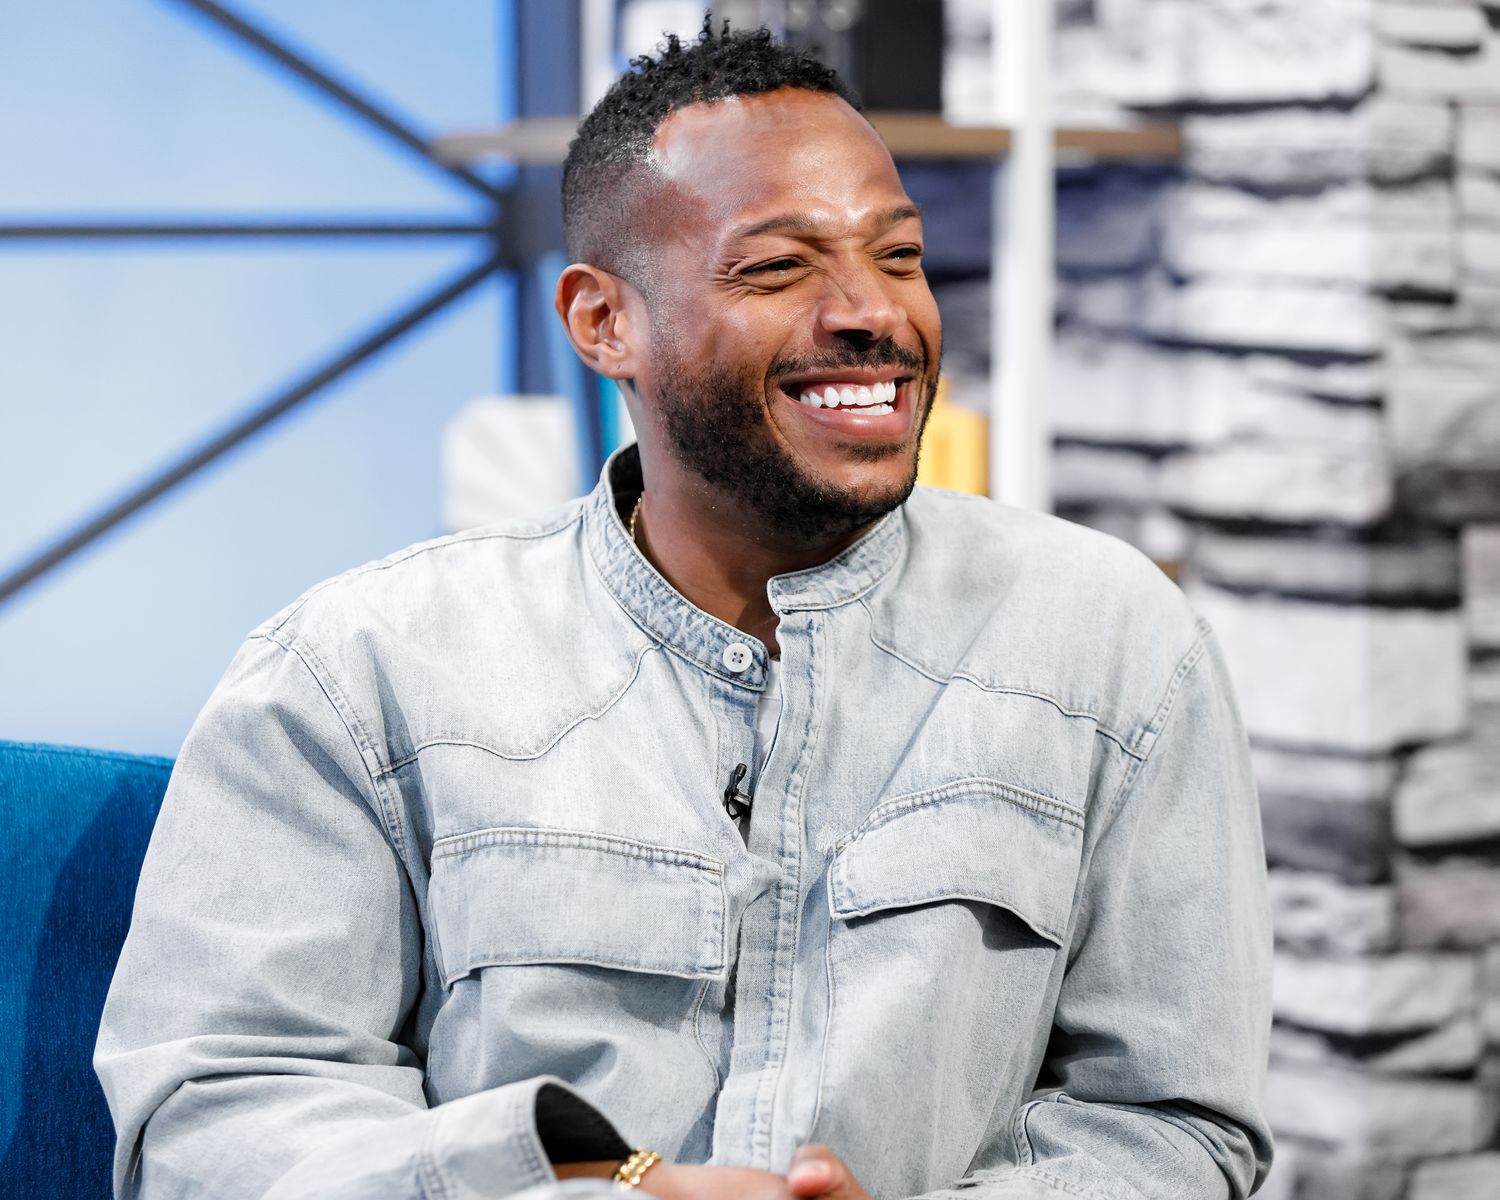 Actor Marlon Wayans at "The IMDb Show" on July 15, 2019. | Photo: Getty Images